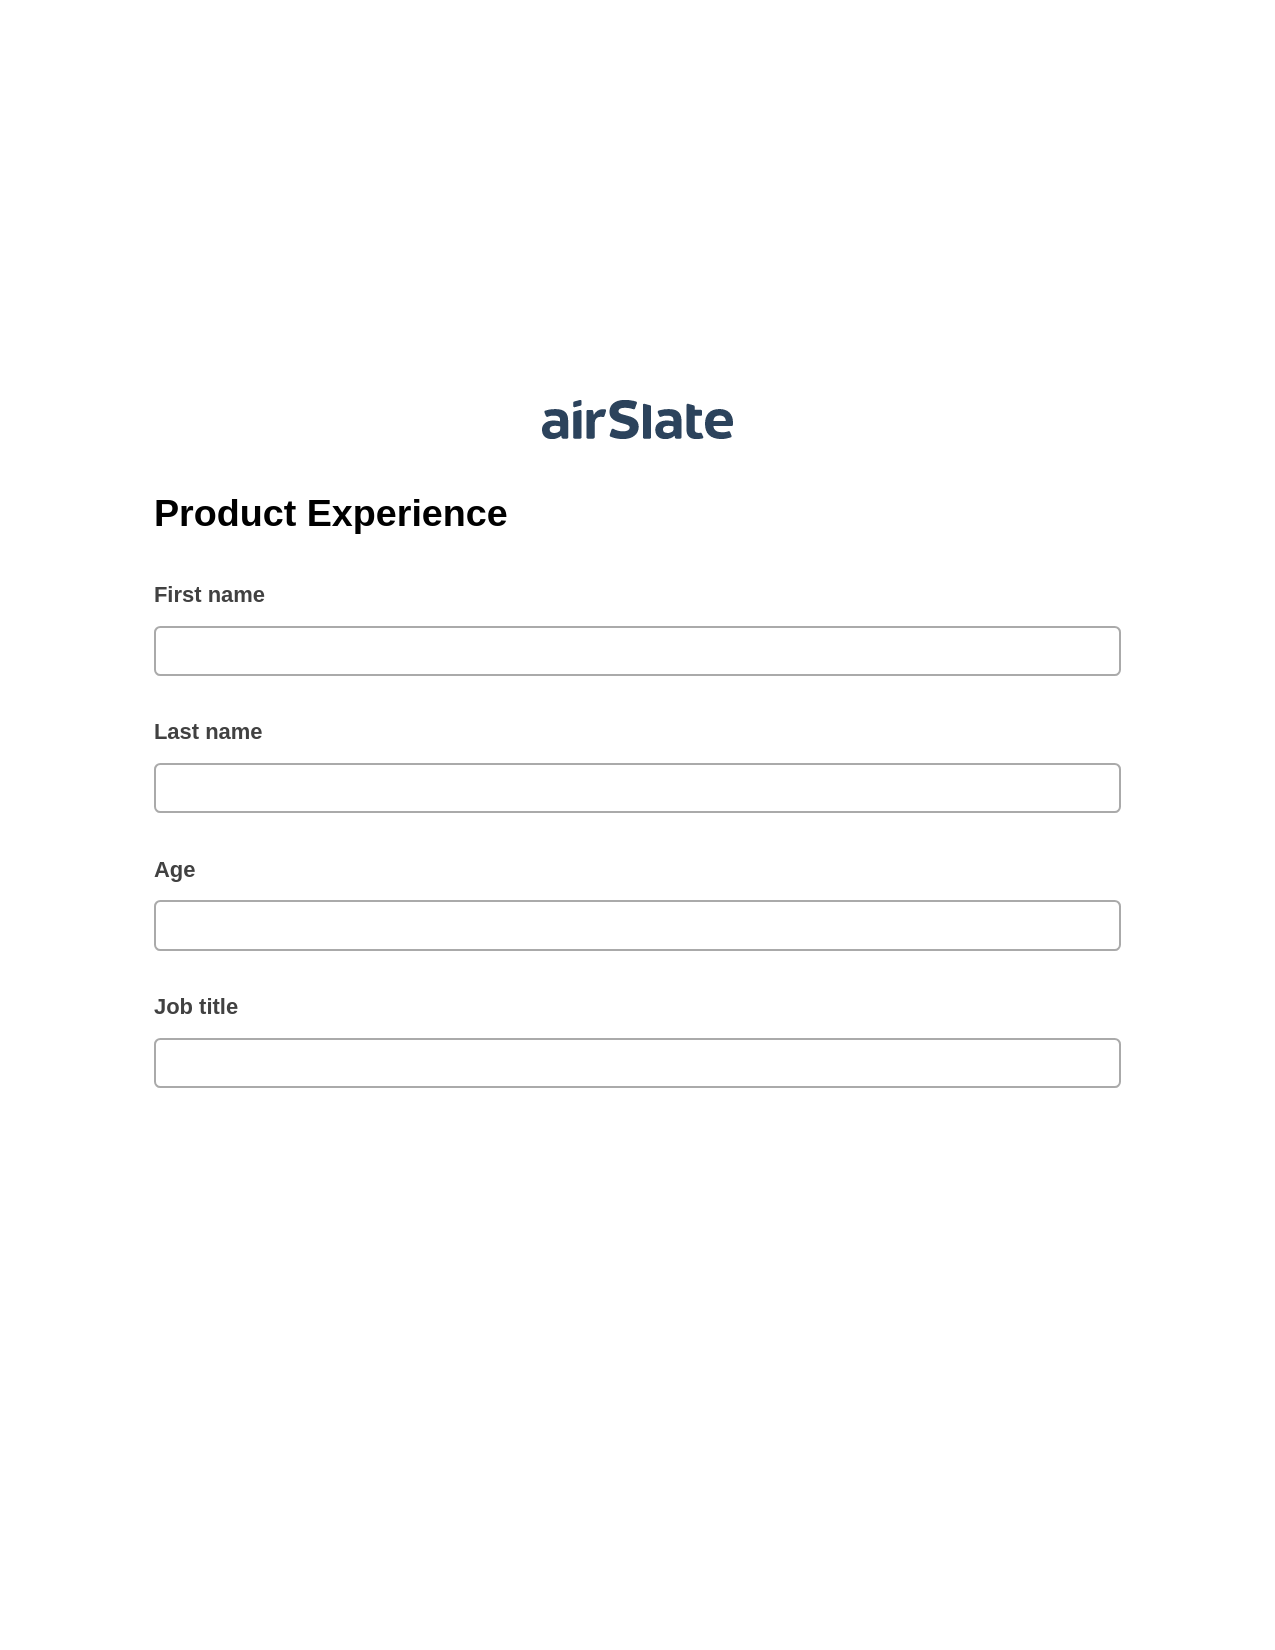 Product Experience Pre-fill from Excel Spreadsheet Bot, Update Salesforce Records Bot, Export to Salesforce Record Bot